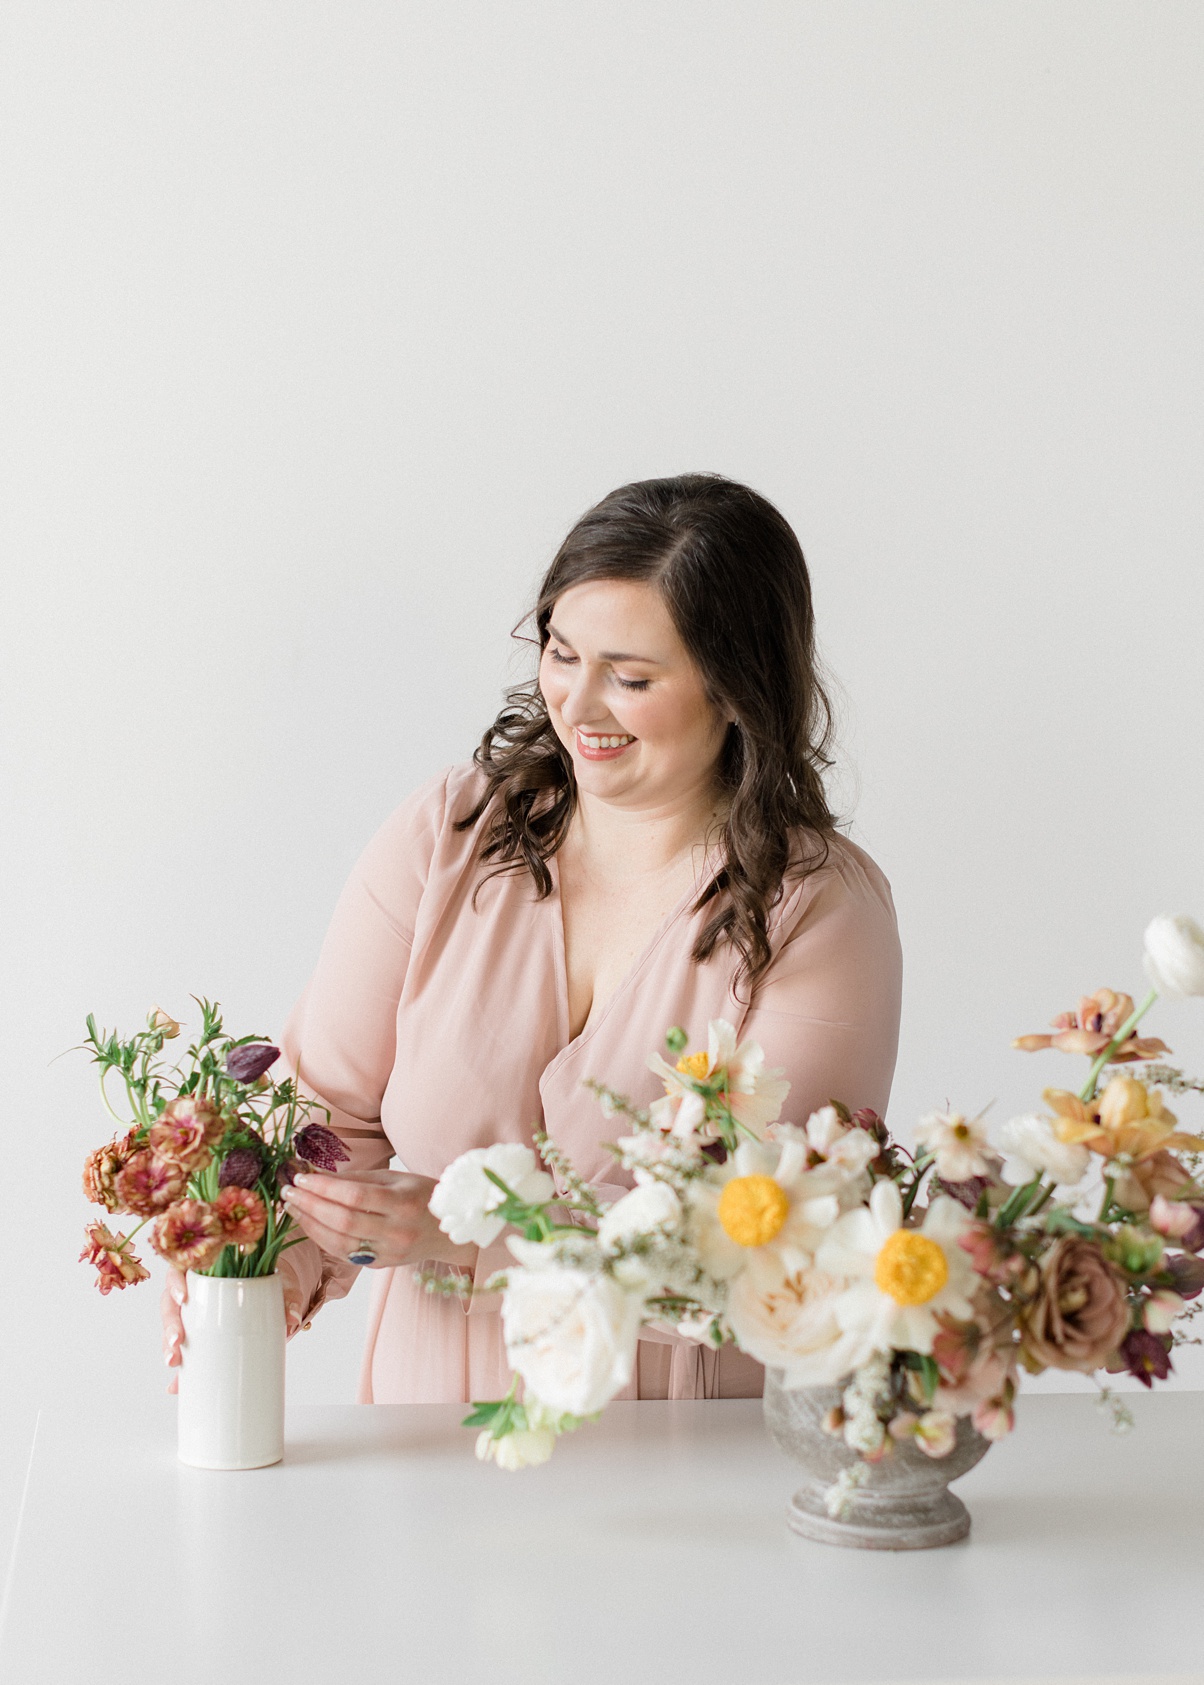 Seattle wedding florist and owner of Bloom Poet, Carolyn Kulb, stands at a table arranging flowers